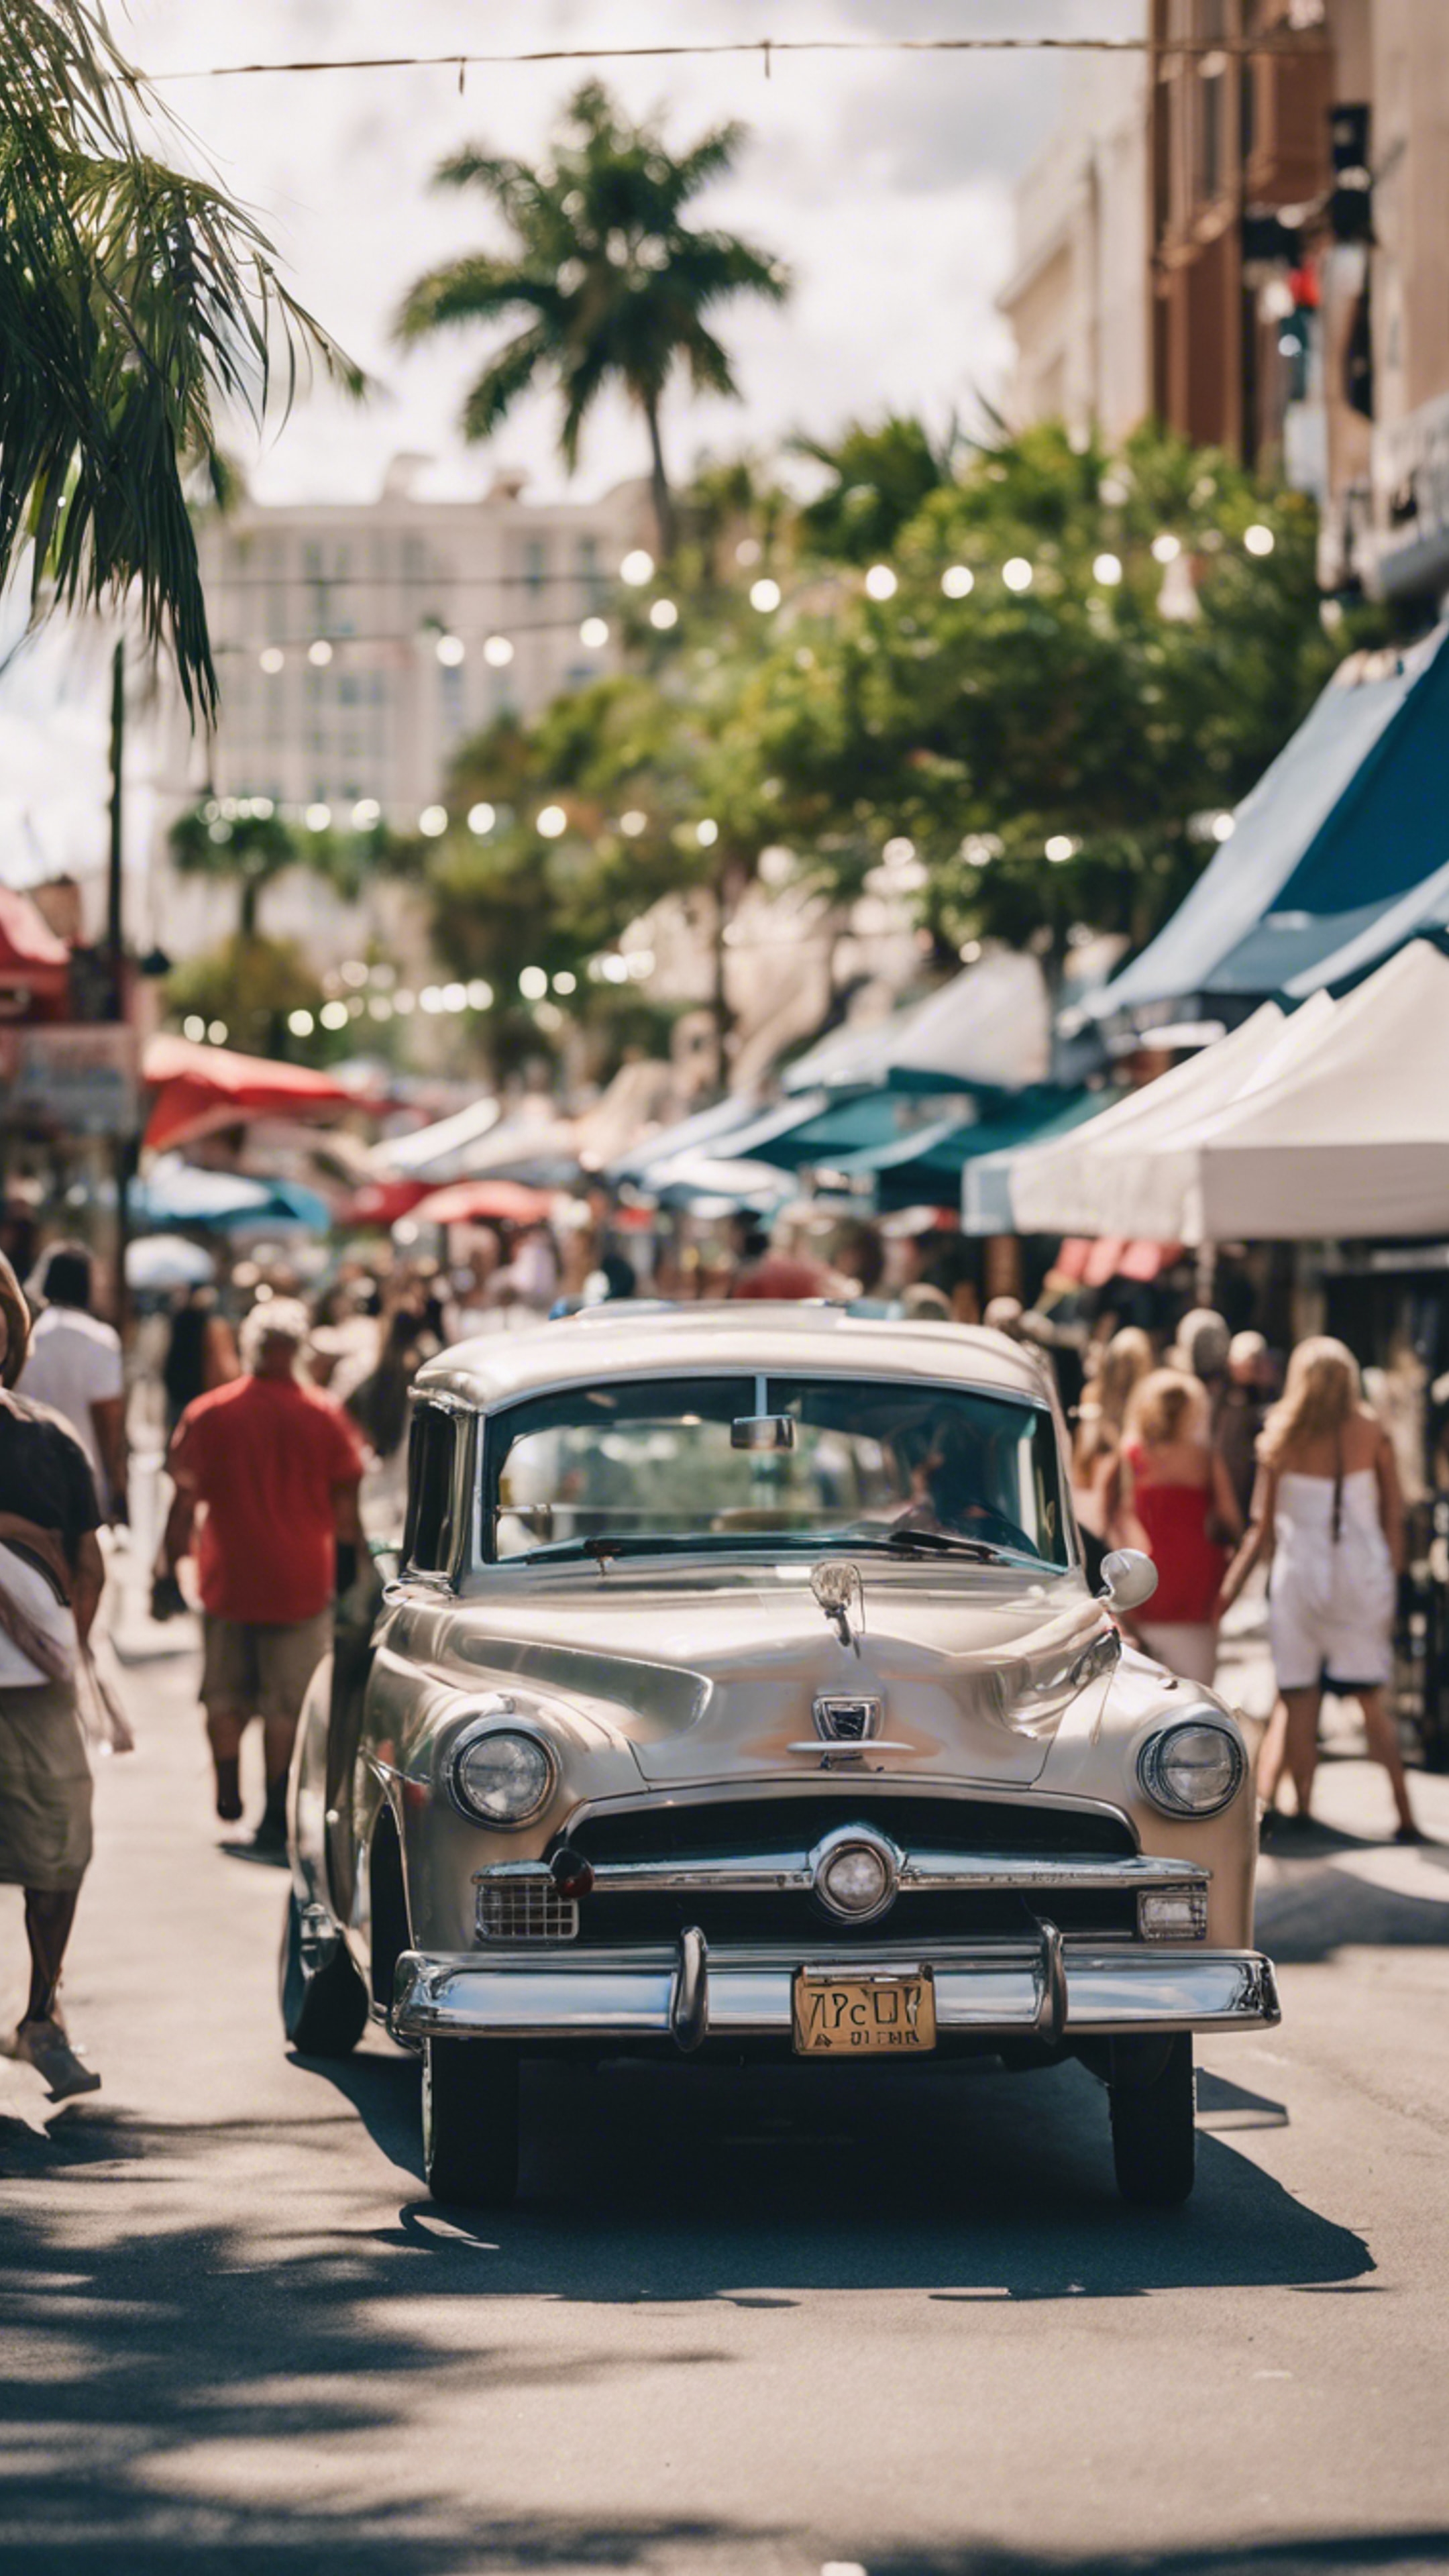 The art and culture-filled streets of downtown West Palm Beach on a Saturday Market Day. Wallpaper[9e1e82f0b2784fd0ae58]